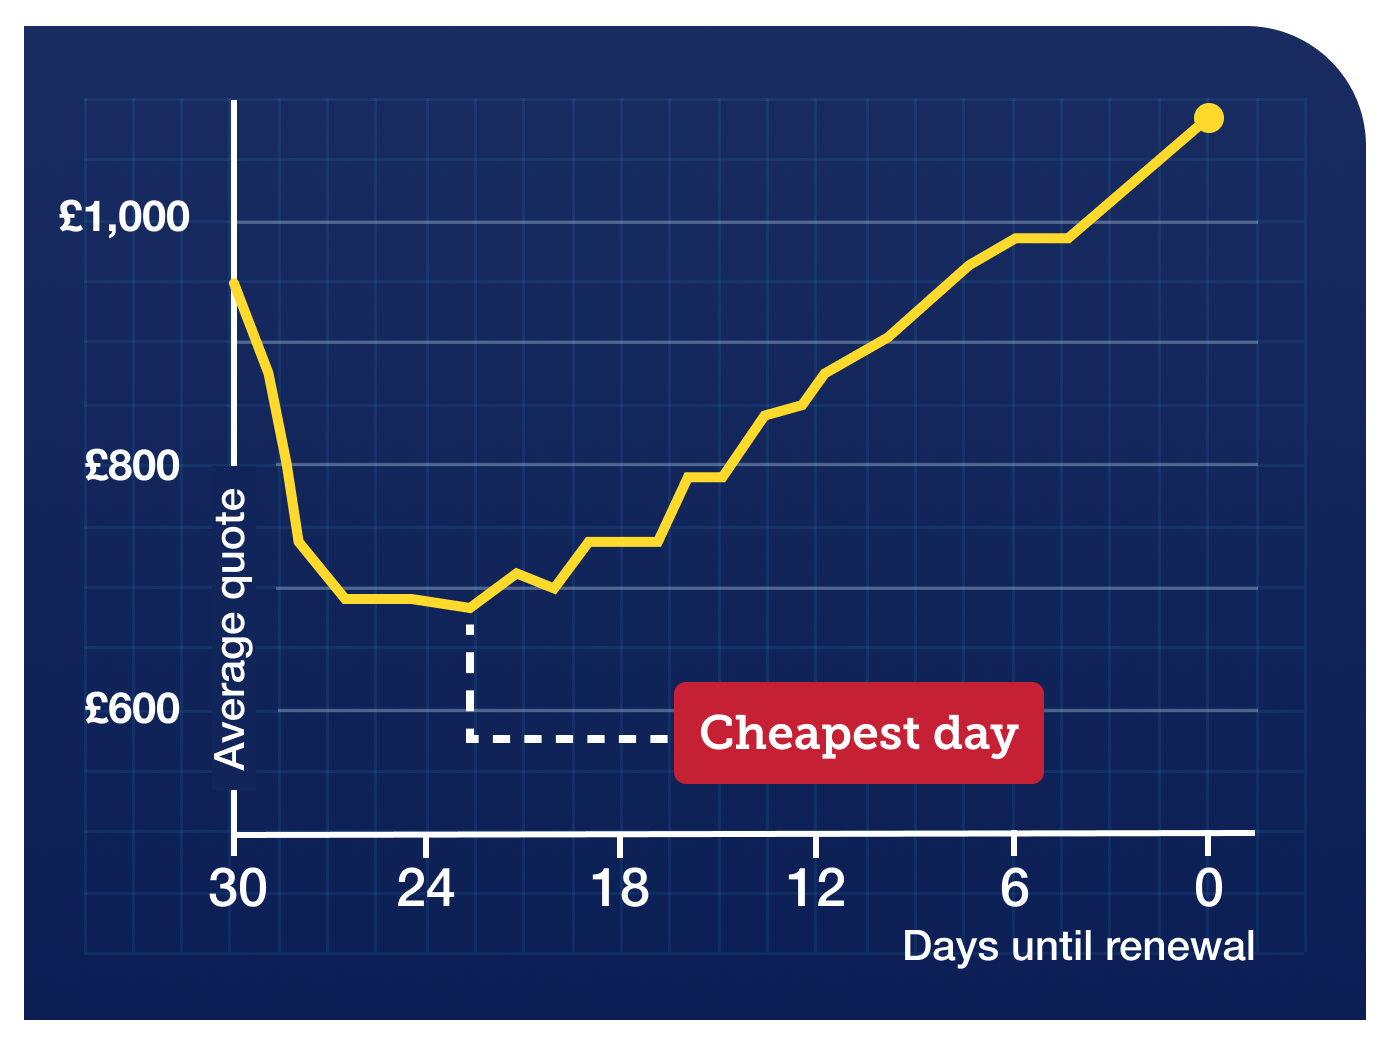 A graph showing how the cost of the average car insurance quote rises the closer you get to your renewal date. The graph shows that a policy costs an average of £1,198 a year on renewal day. But 23 days earlier (when the cheapest quotes are given) the average is just £694 a year, a huge £504 difference. Graph links to full info on this MoneySaving tip in our Cheap car insurance guide.